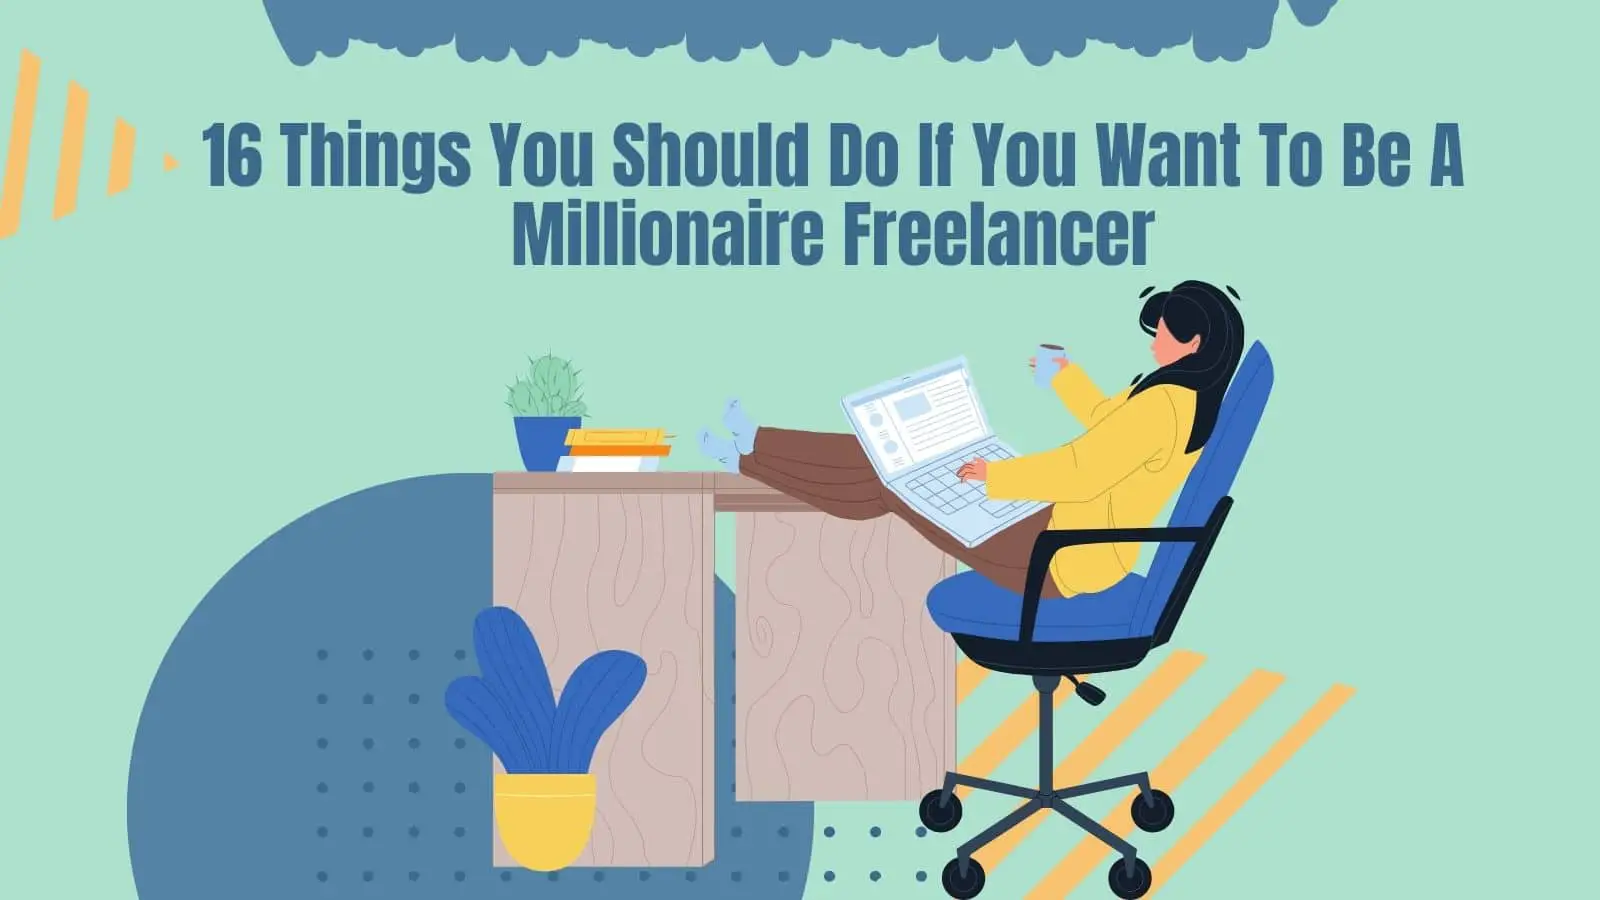 16 Things You Should Do If You Want To Be A Millionaire Freelancer